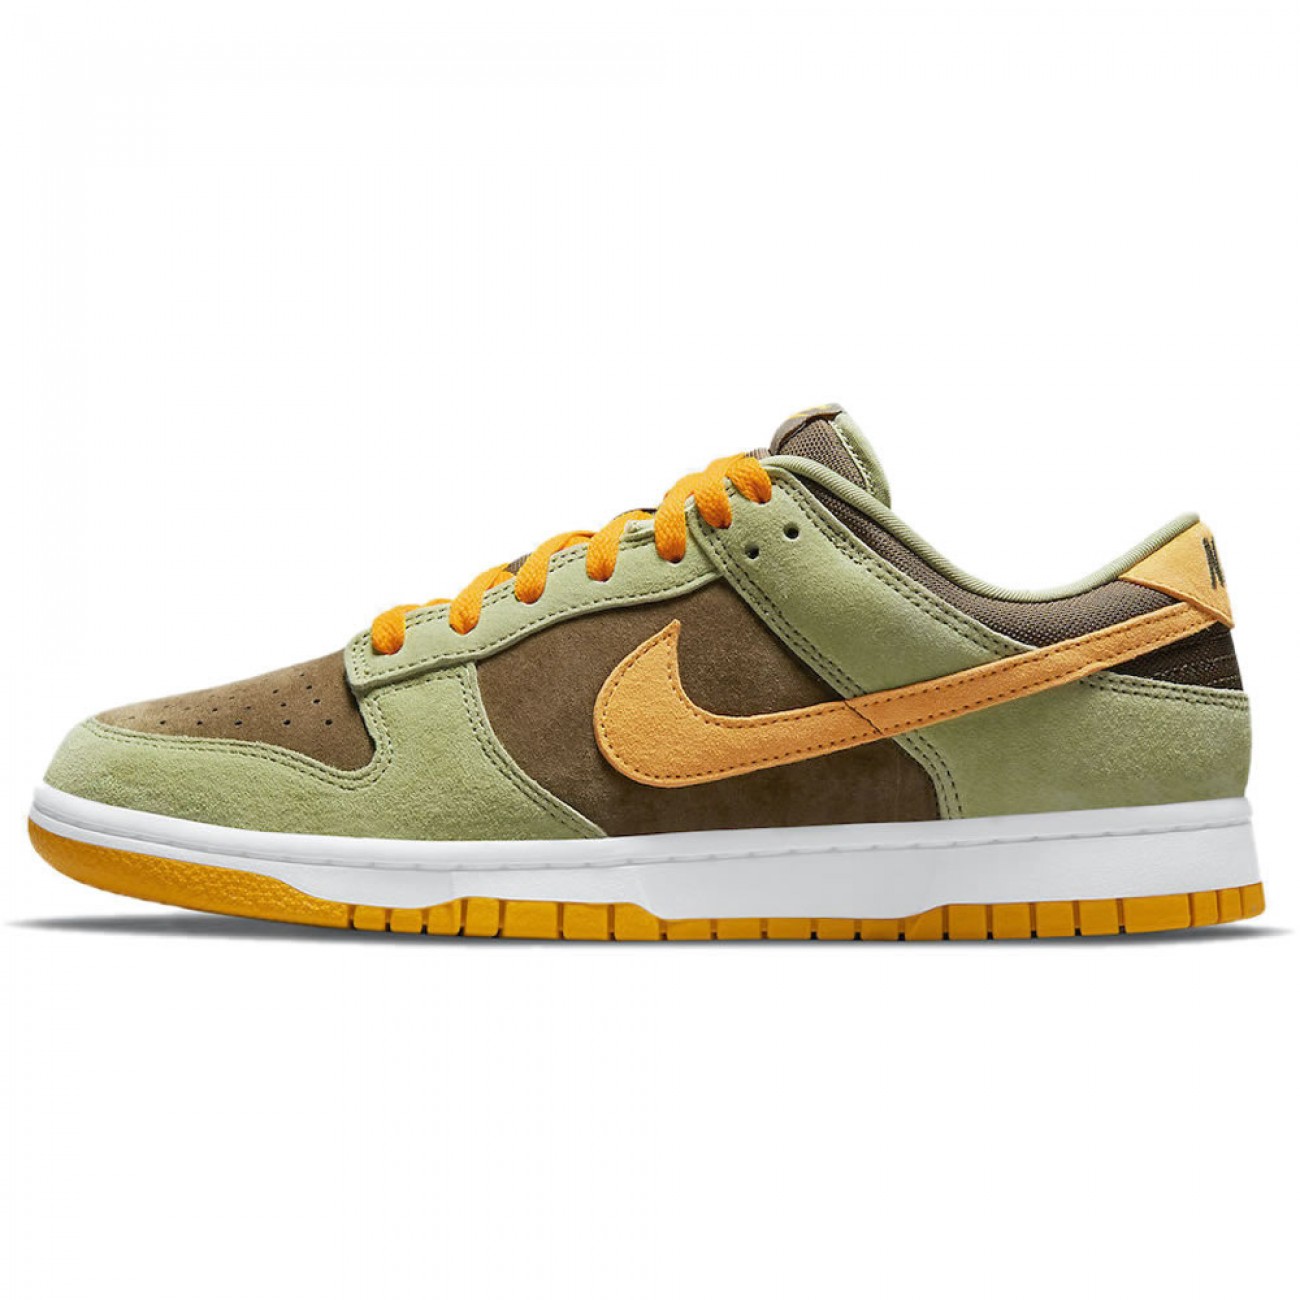 Nike Dunk Low "Dusty Olive" DH5360-300